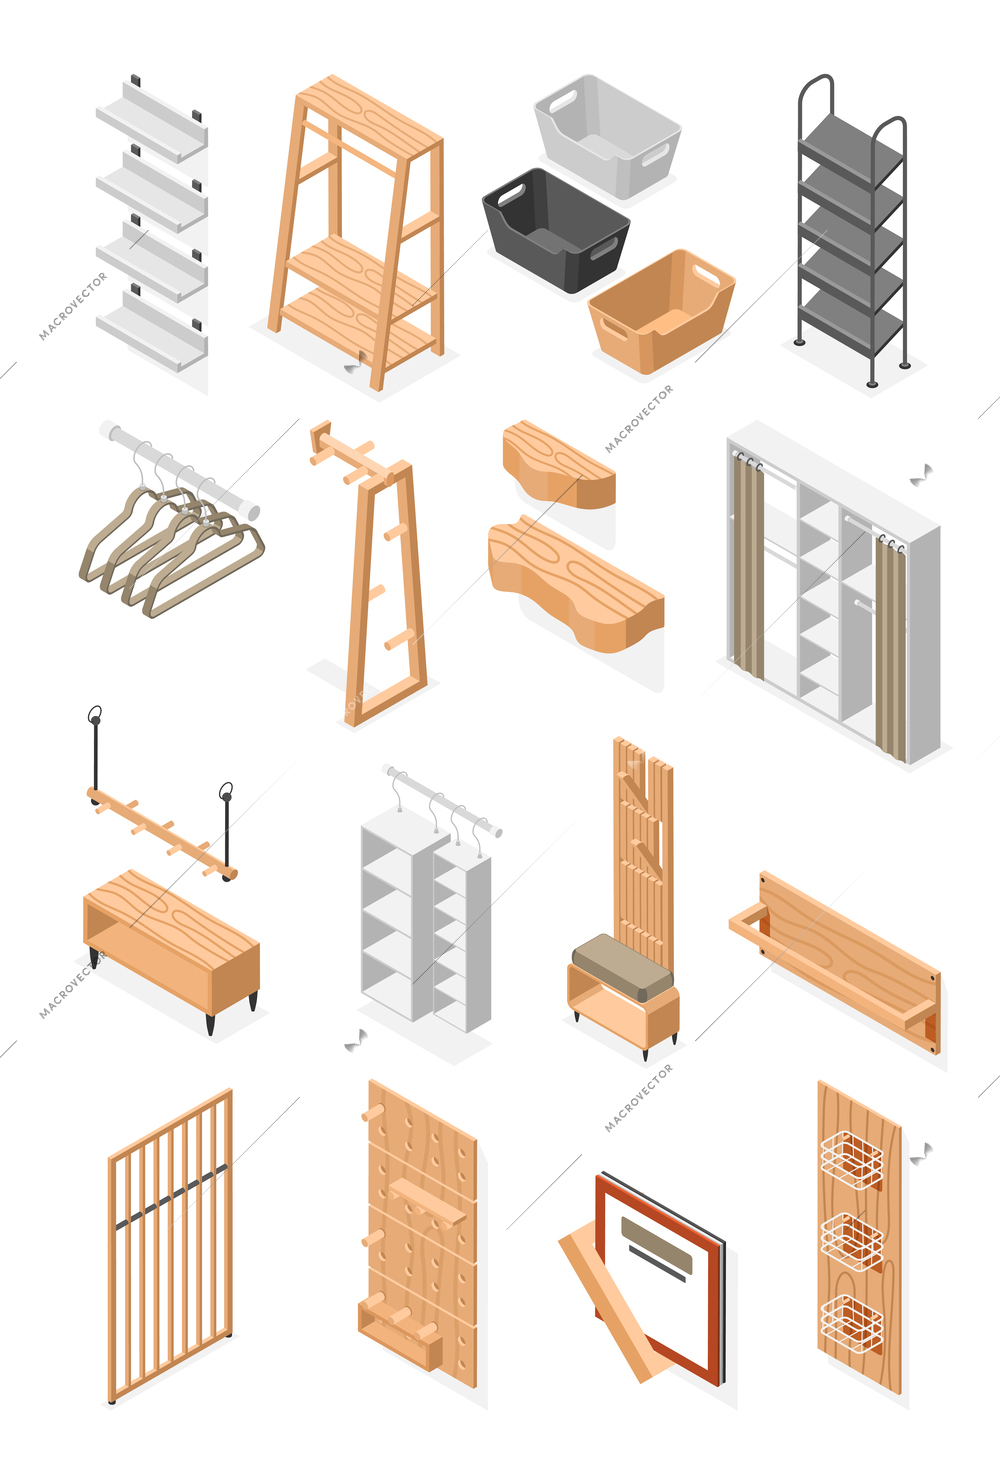 Store room set with isometric icons of furniture elements with rack stands shelves hangers and baskets vector illustration